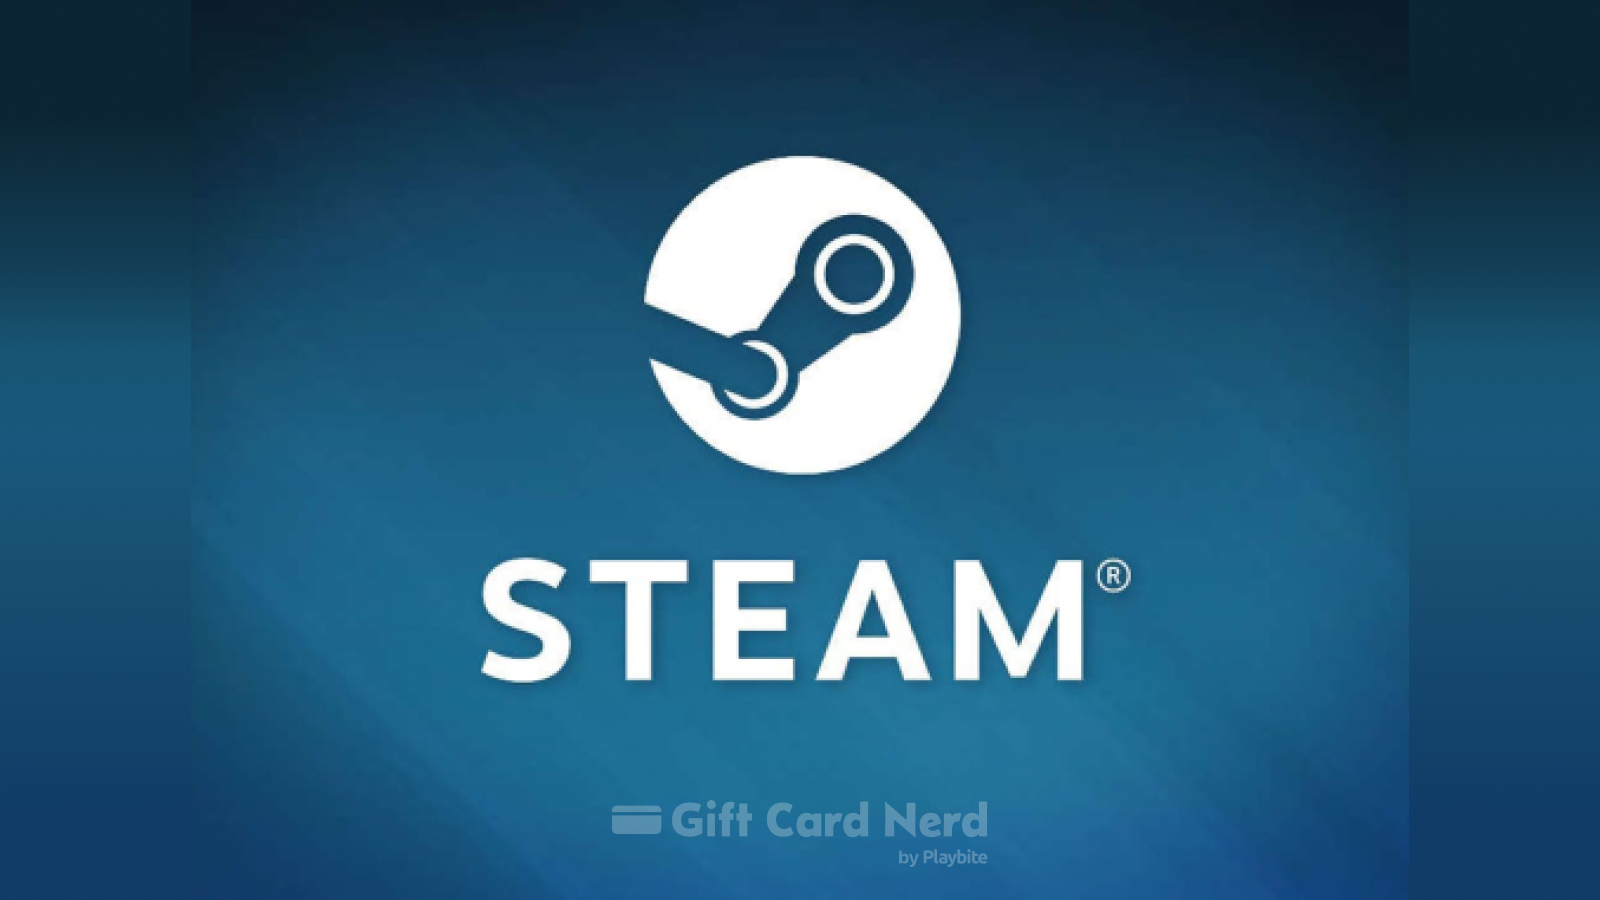 Does CVS Sell Steam Gift Cards?